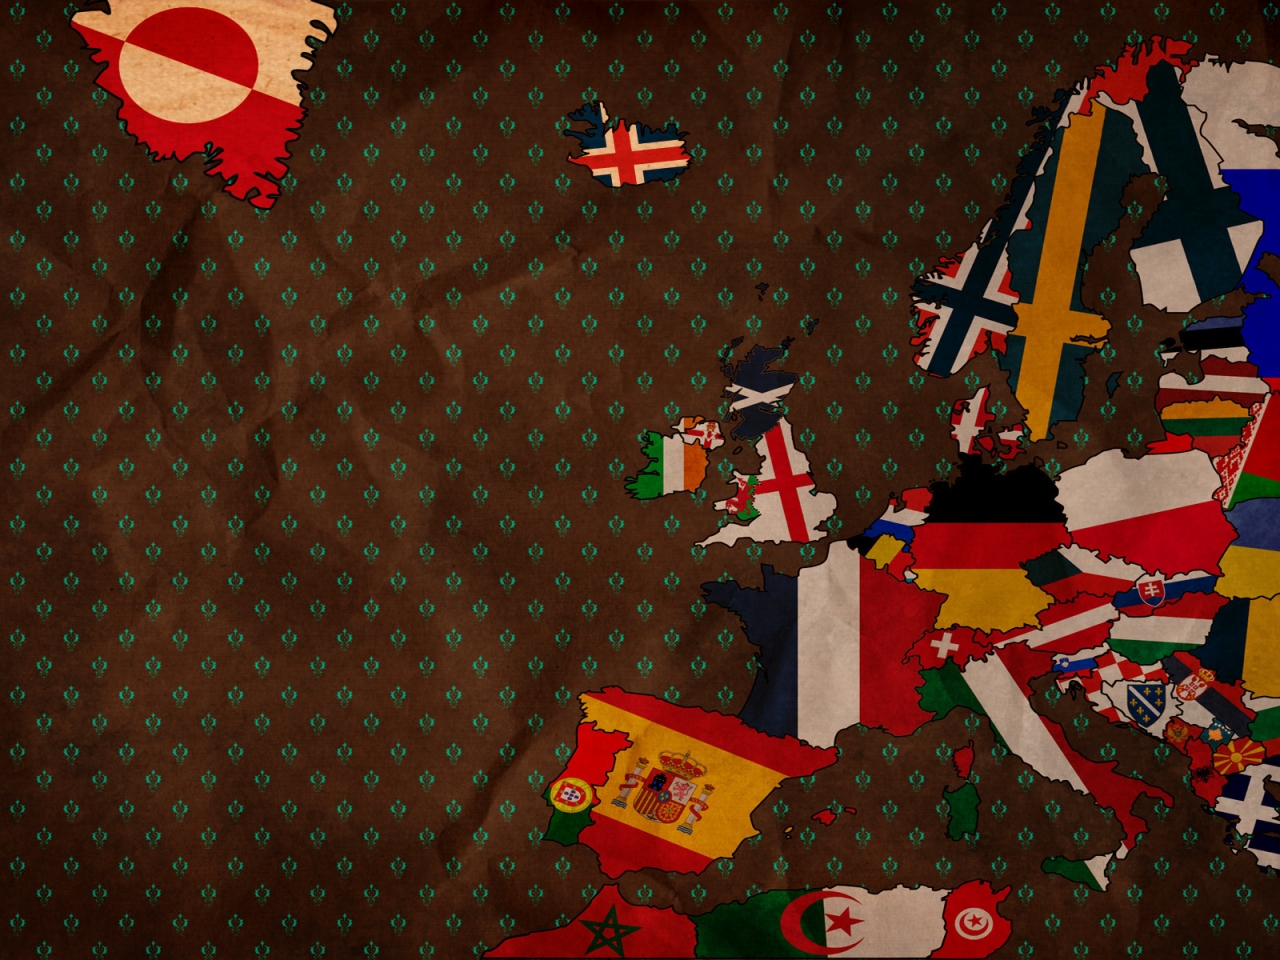 Bits of Flags for 1280 x 960 resolution